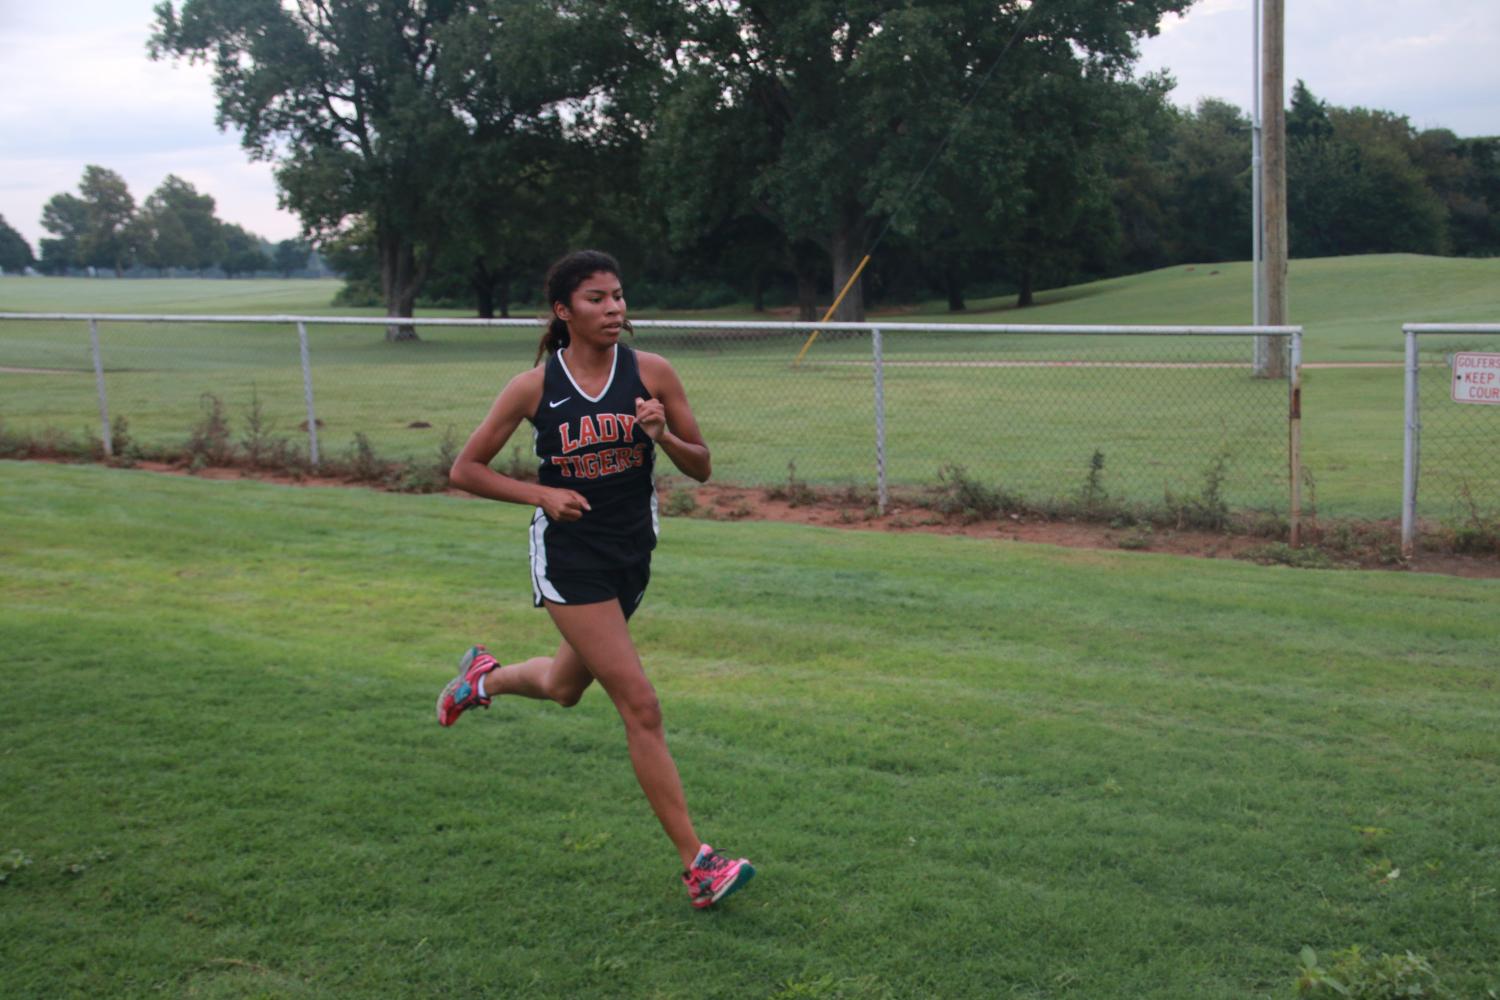 LaShayla Green medaled in her first meet of the season. 